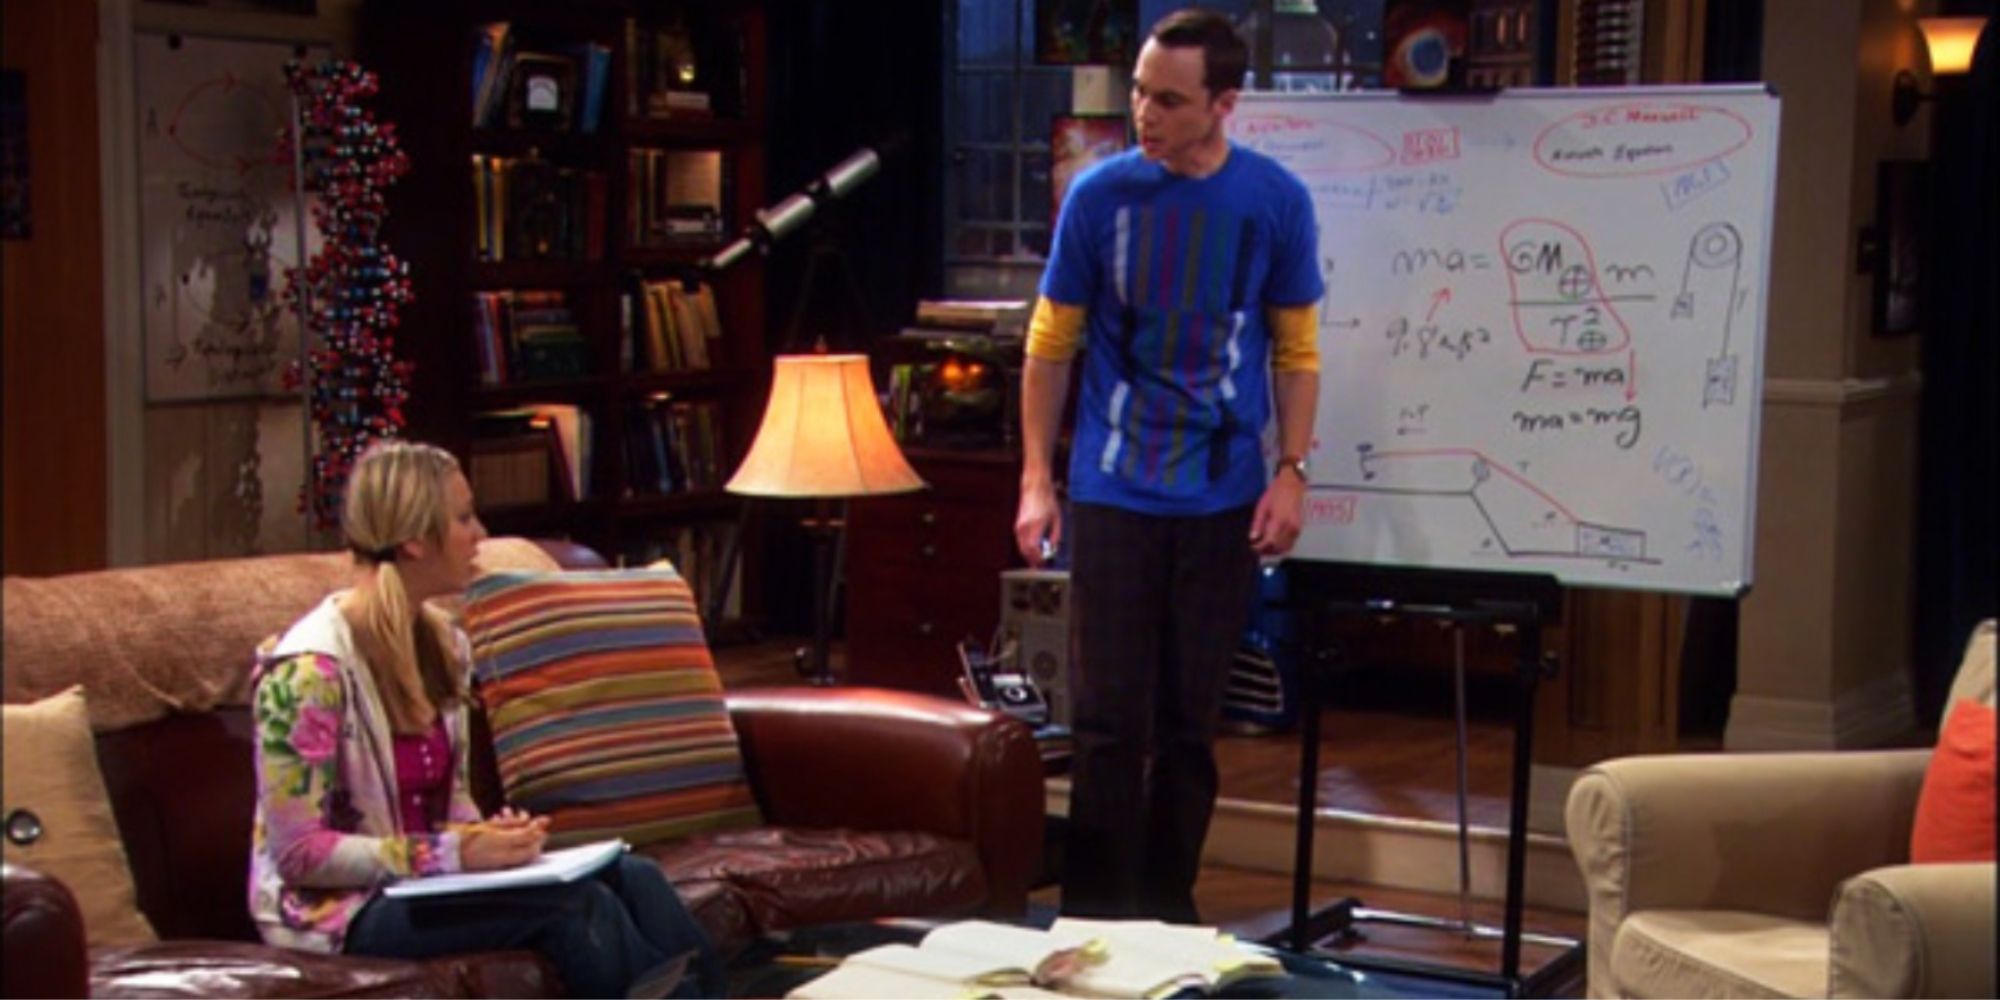 An image of Sheldon teaching Penny in The Big Bang Theory